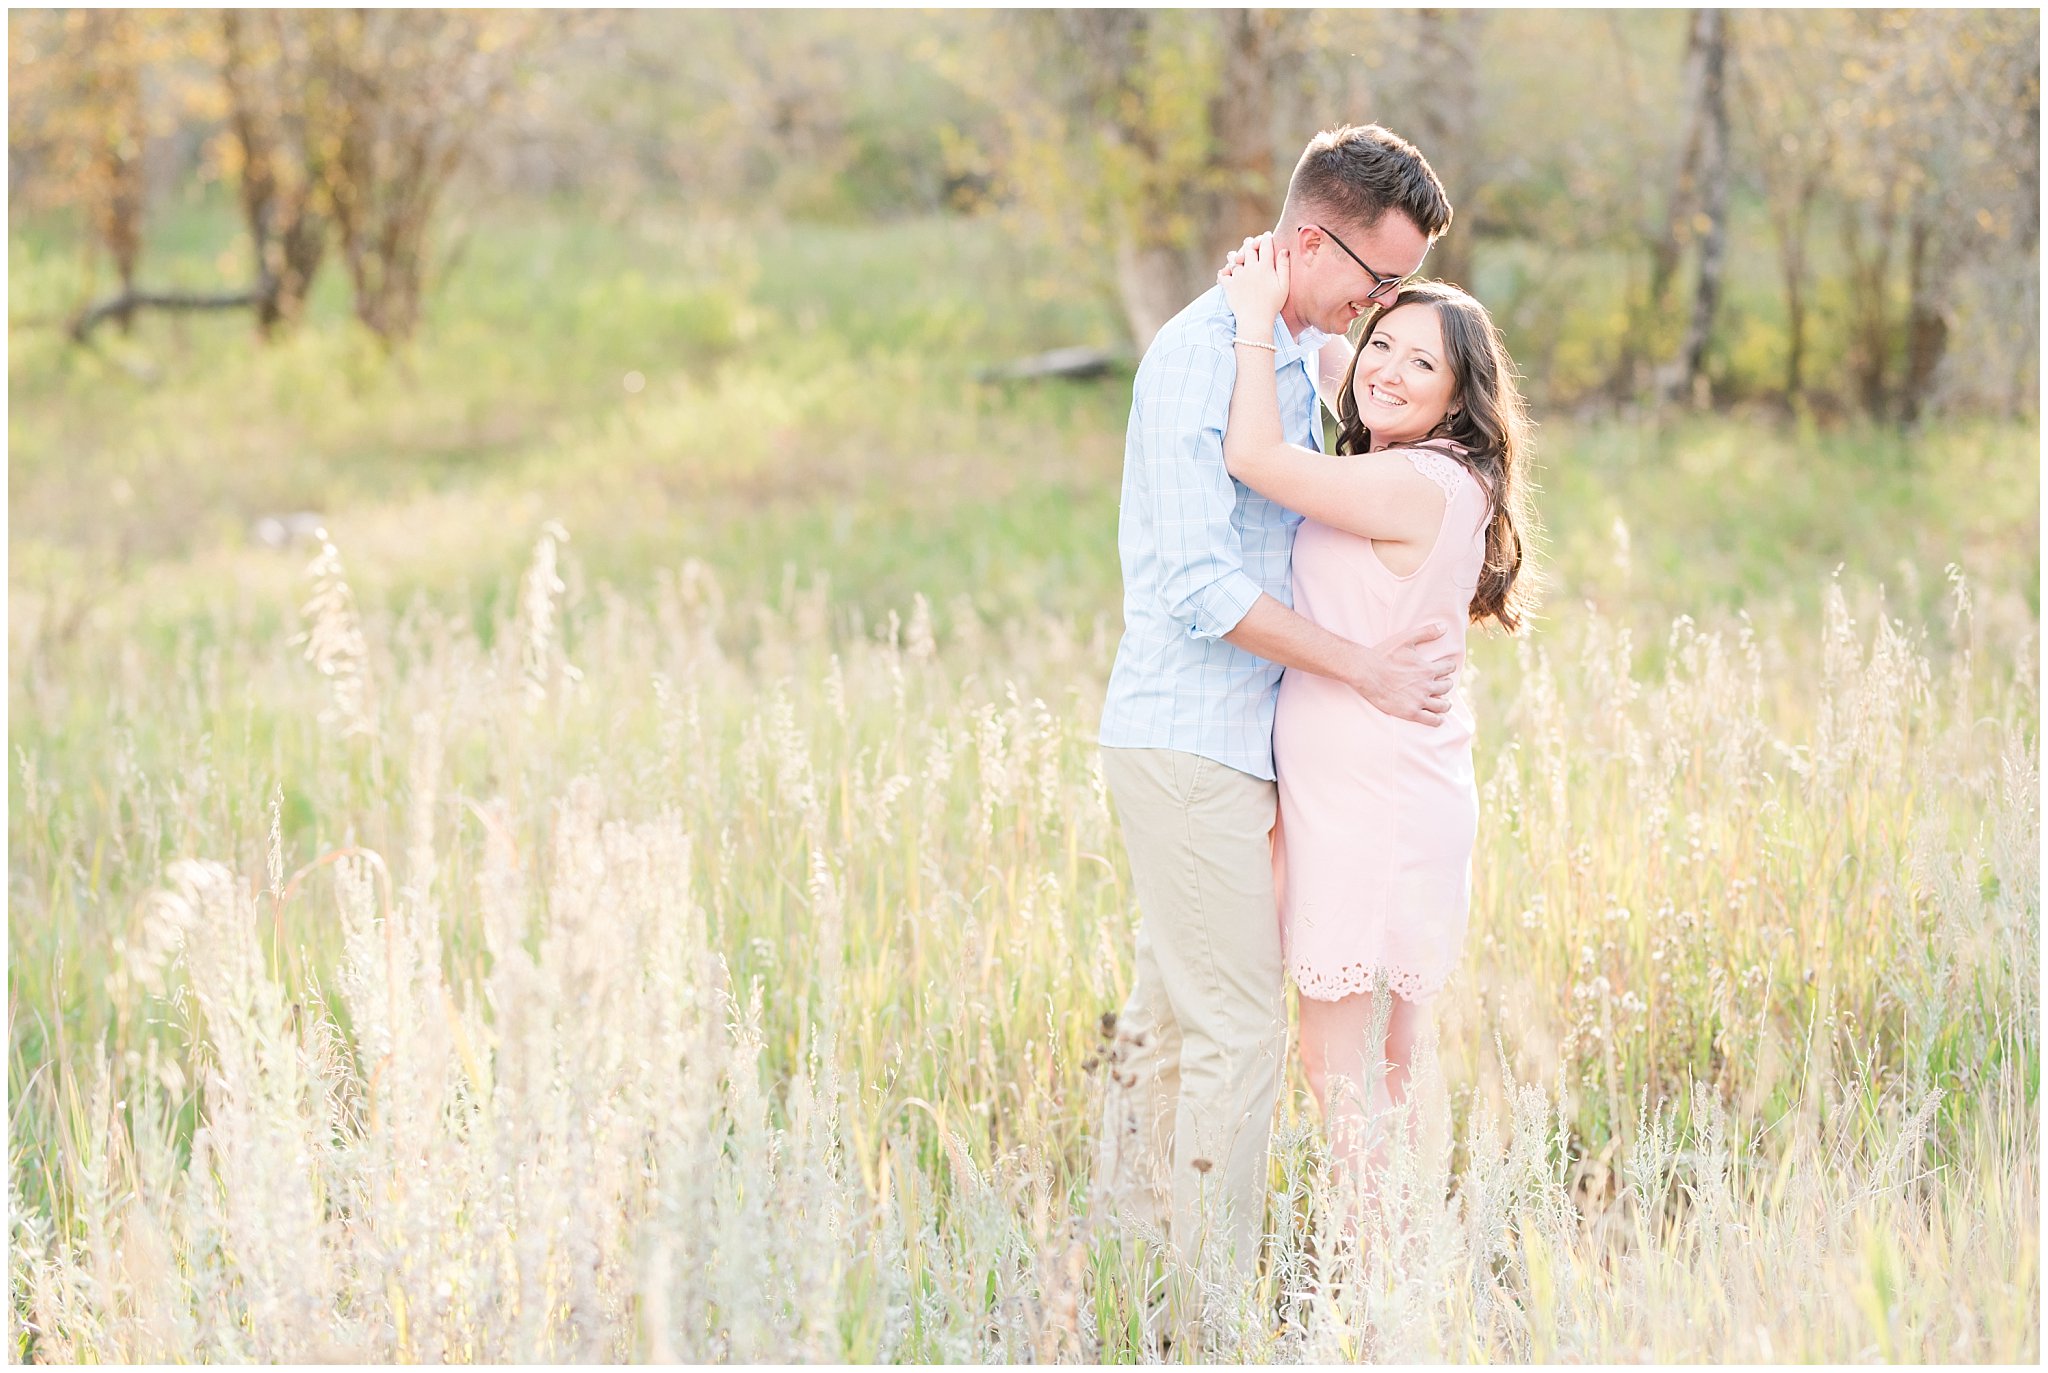 Couple in light blue shirt, tan pants and blush dress | Snowbasin woods and fall trees | A Classic Snowbasin Fall Engagement Session | Jessie and Dallin Photography